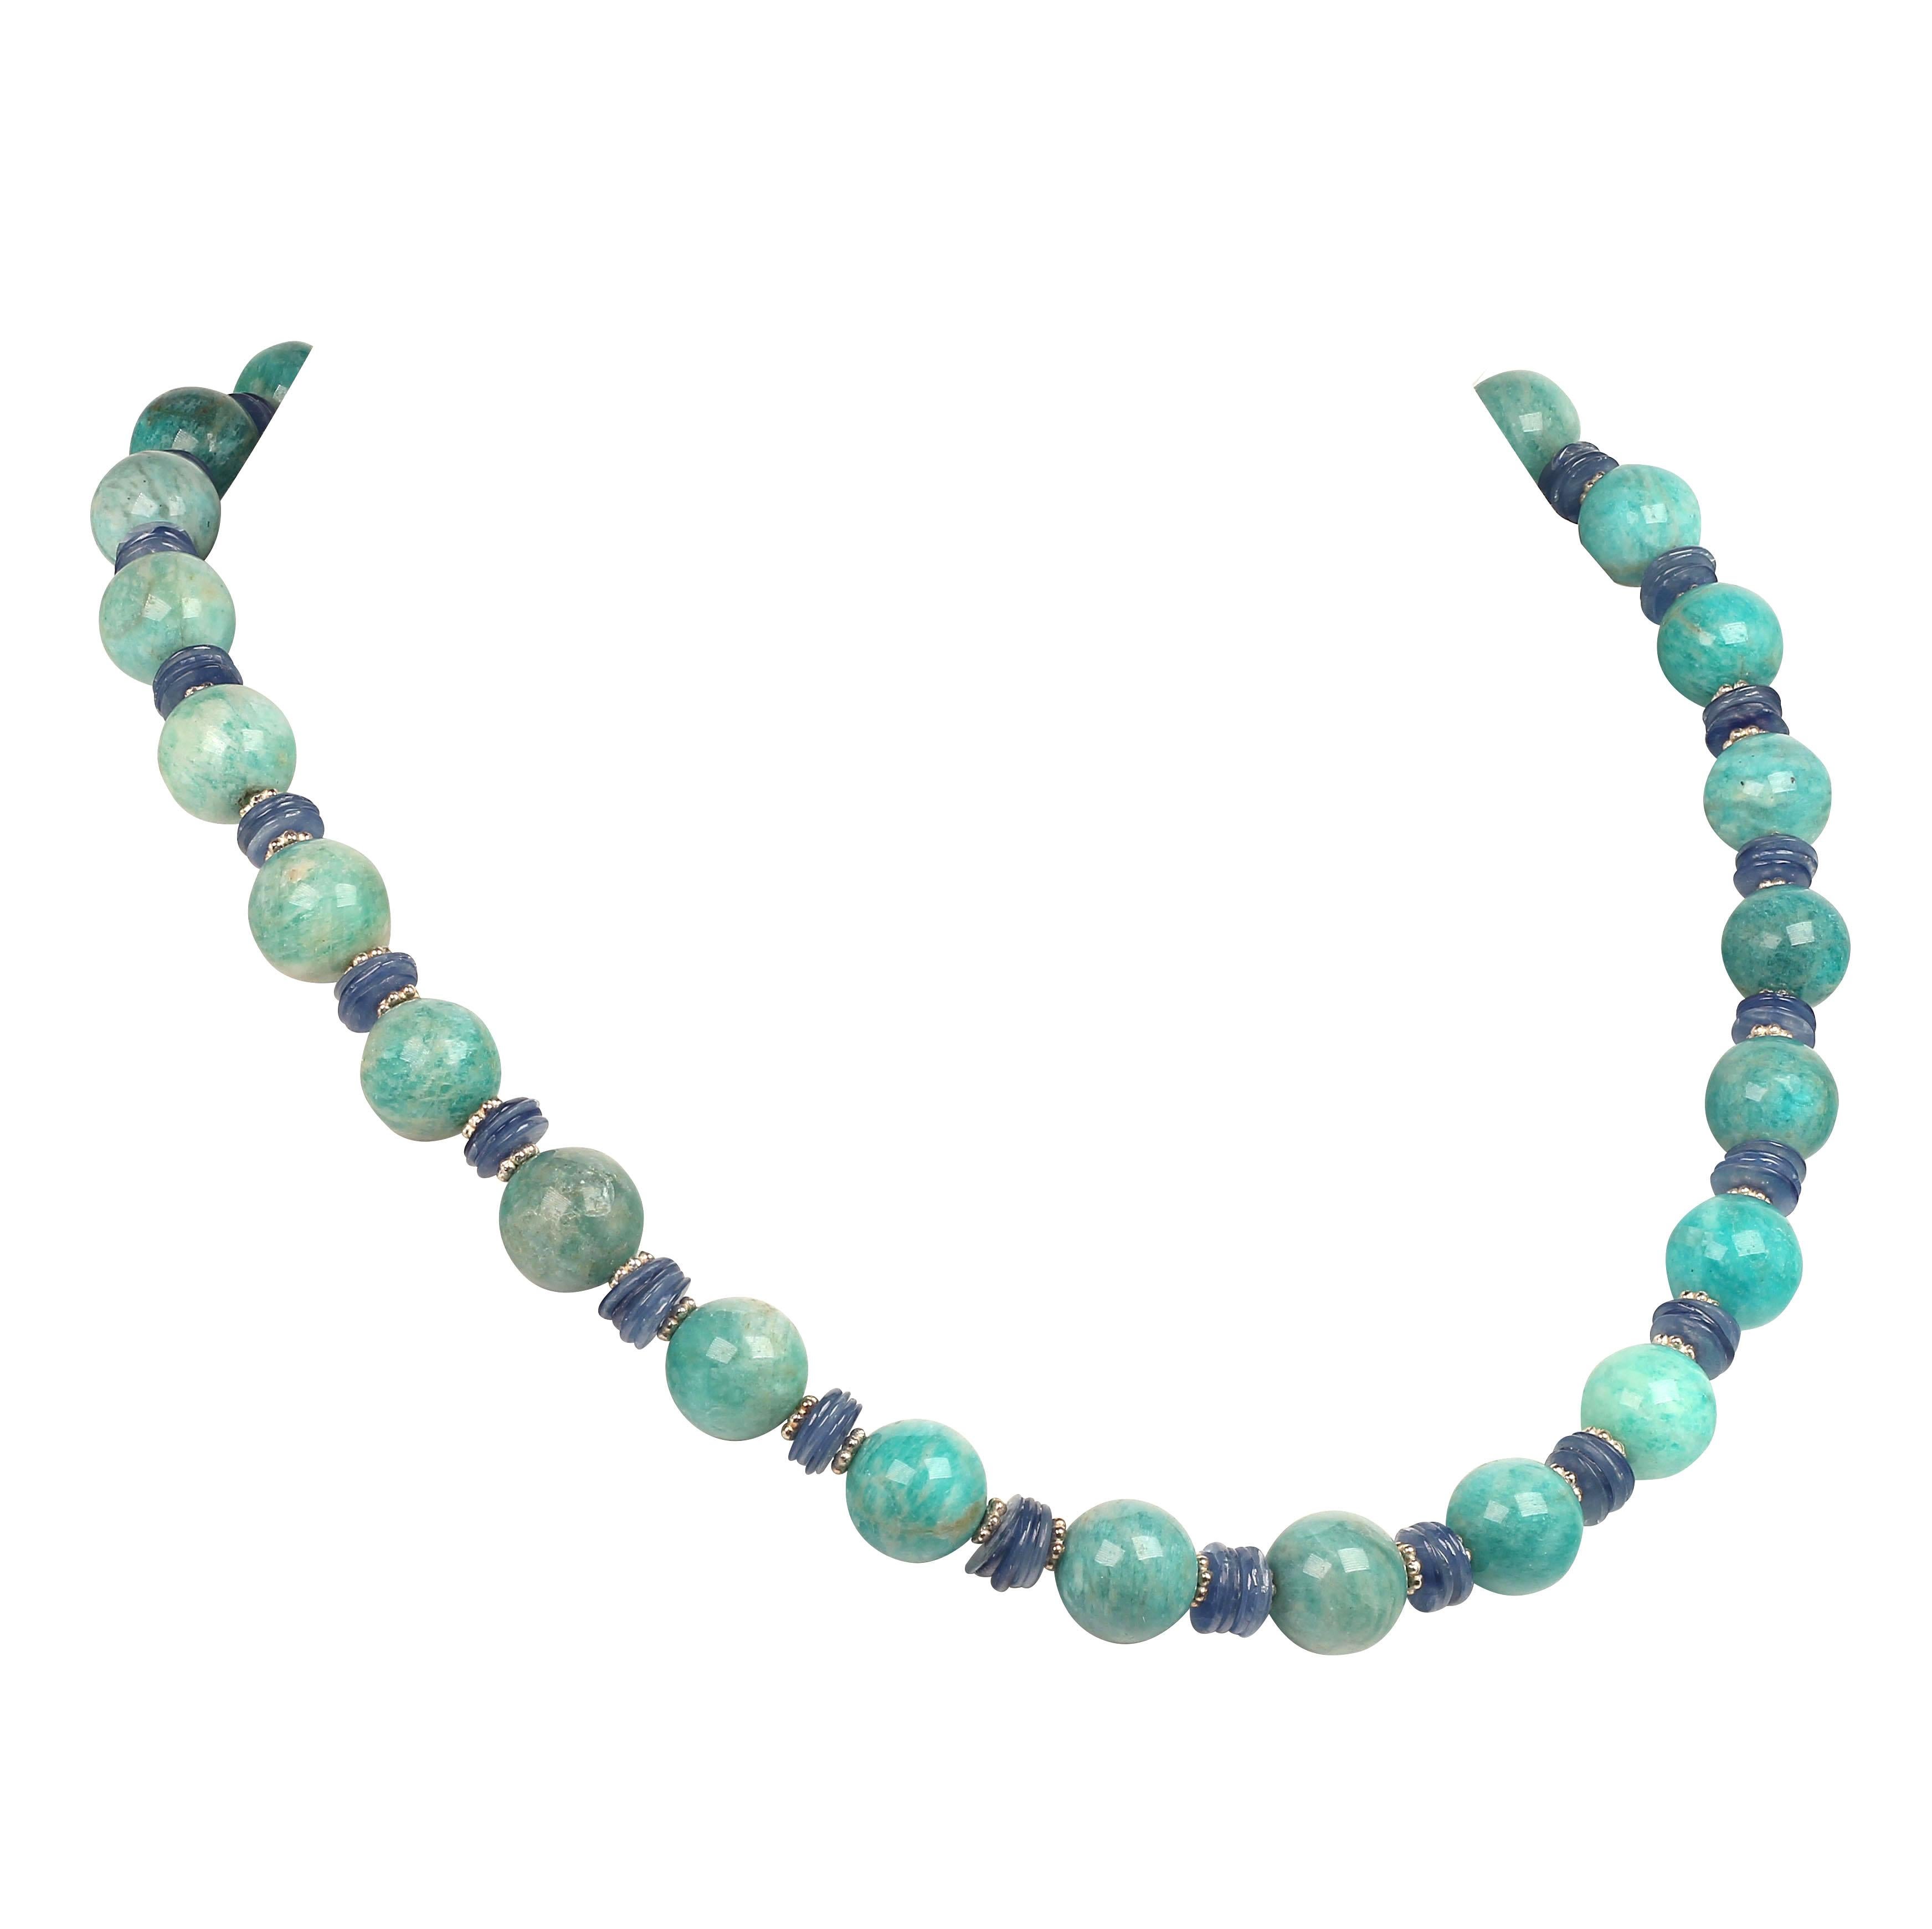 AJD Glowing Green Amazonite and Shining Blue Kyanite Necklace